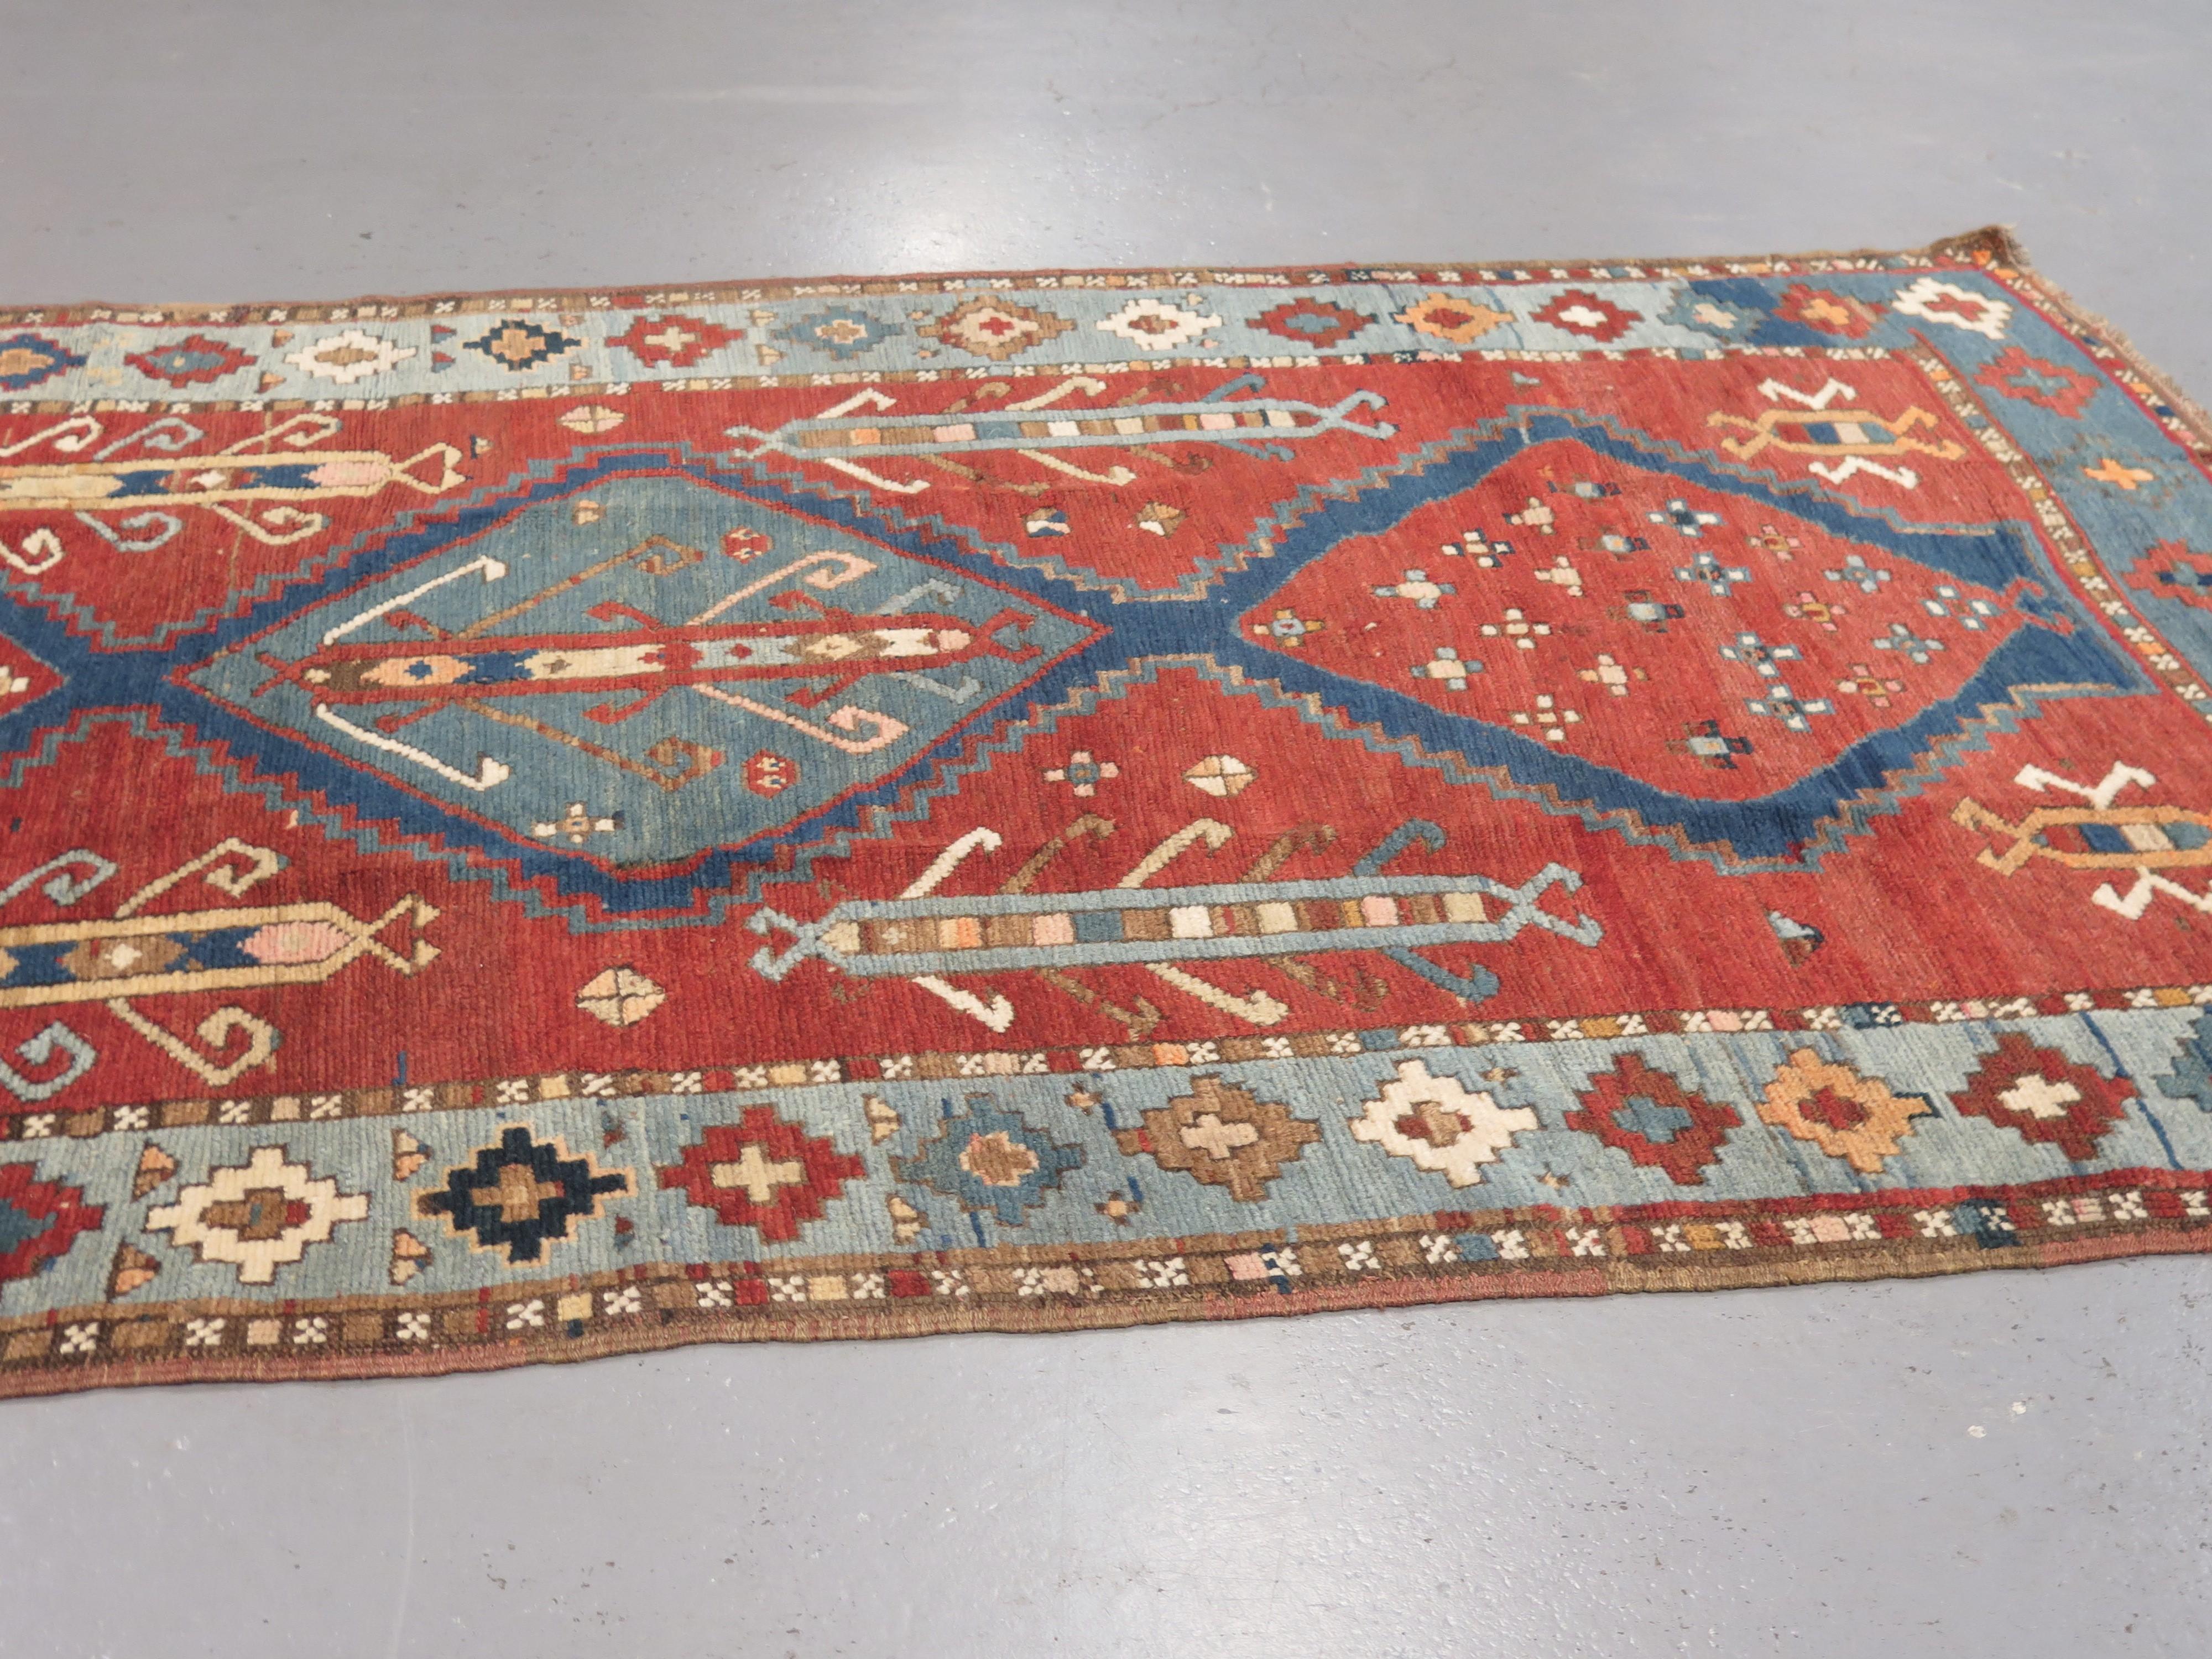 Antique Kazak rugs, woven in the Southern Caucasus, are among the most highly prized tribal weavings, famed for the diversity of their designs, bold palettes, and the high density of knots in their weaves, lending a crisp clarity to the geometric